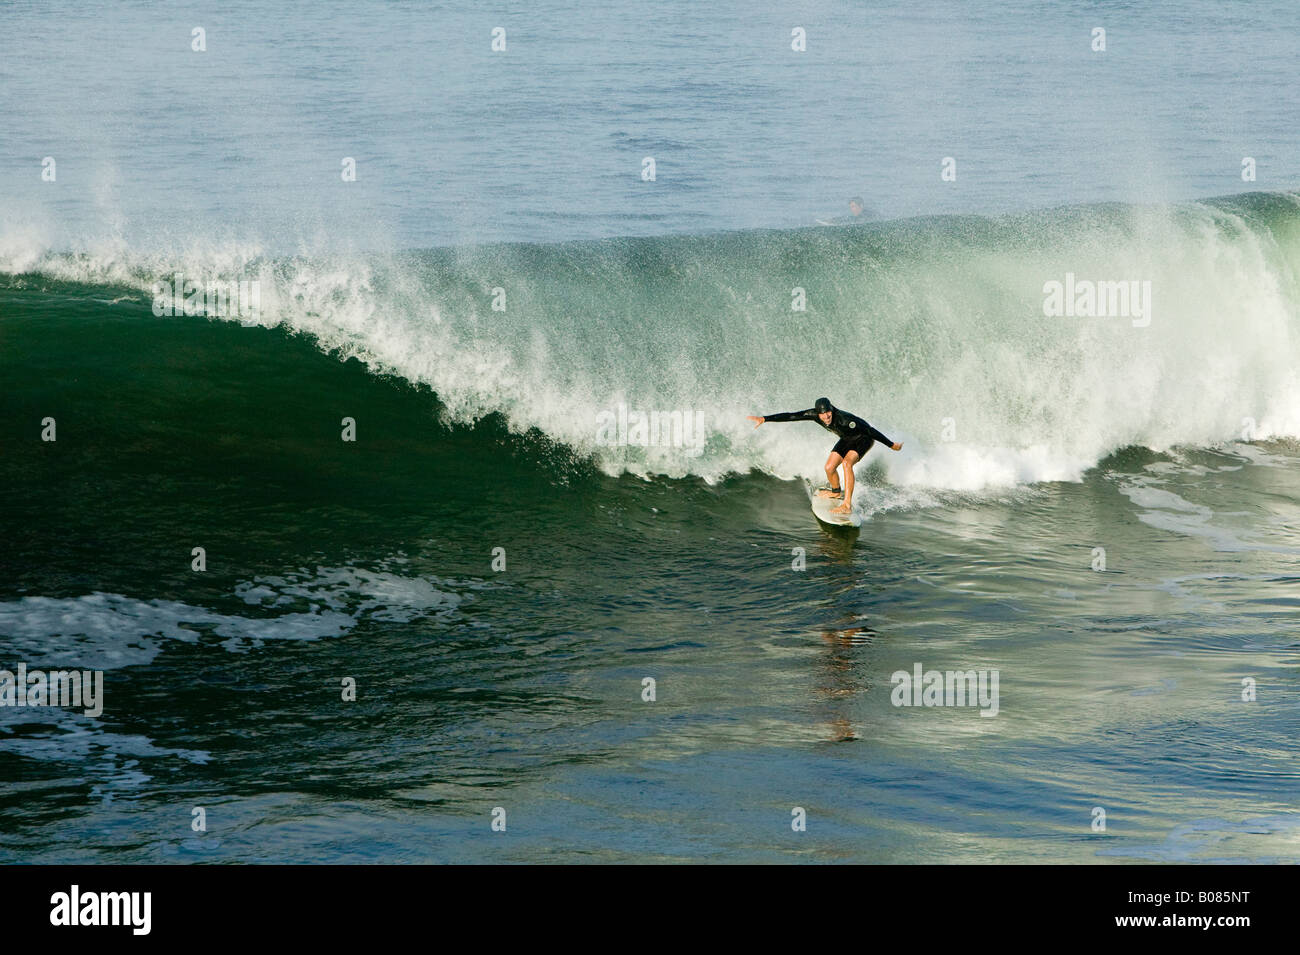 A surfer tries to keep his balance as he begins his ride on a nice wave. Stock Photo